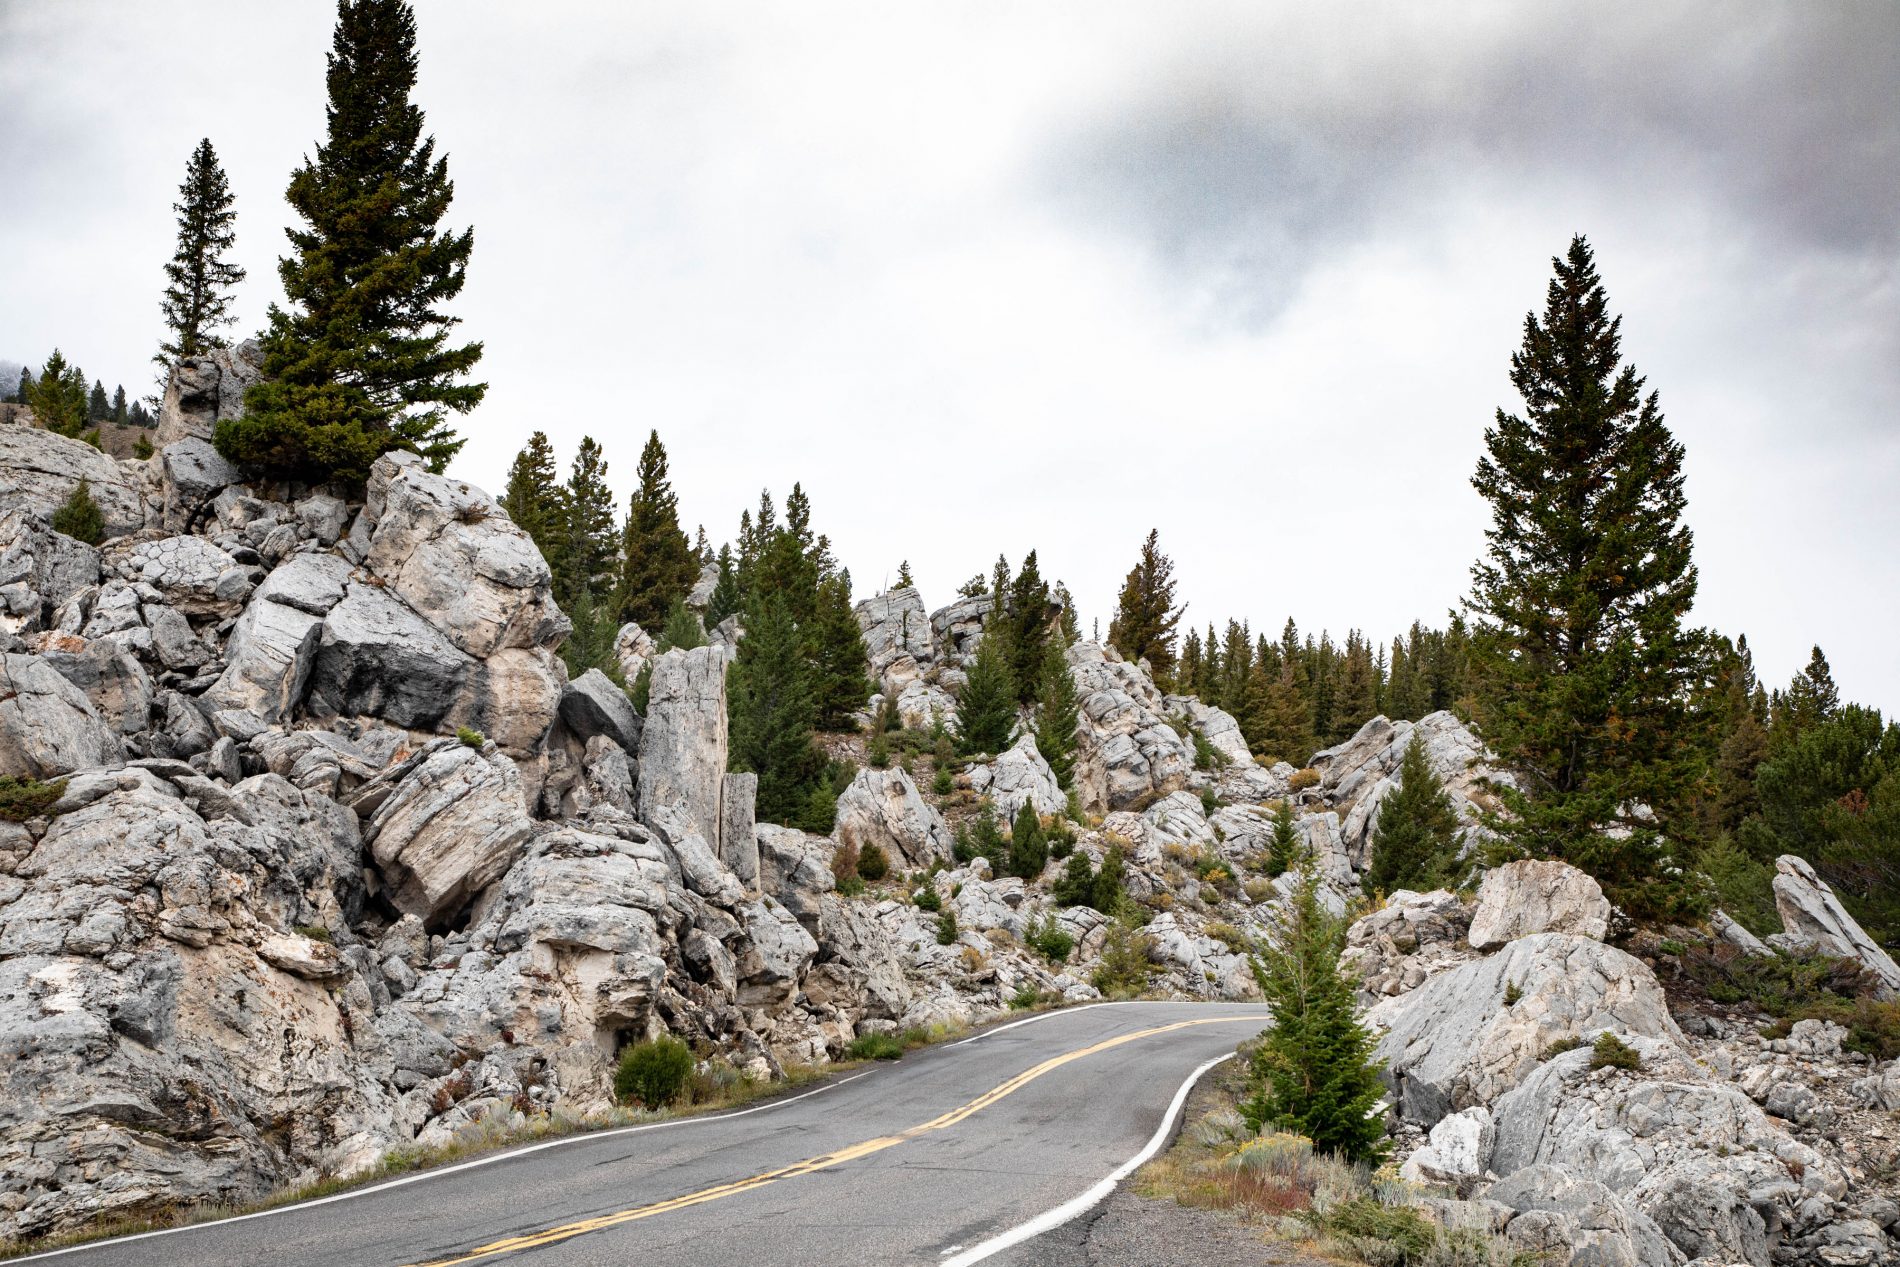 A huge jumble of giant boulders and petrified wood along the road near Yellowstone Hot Springs in Mammoth.